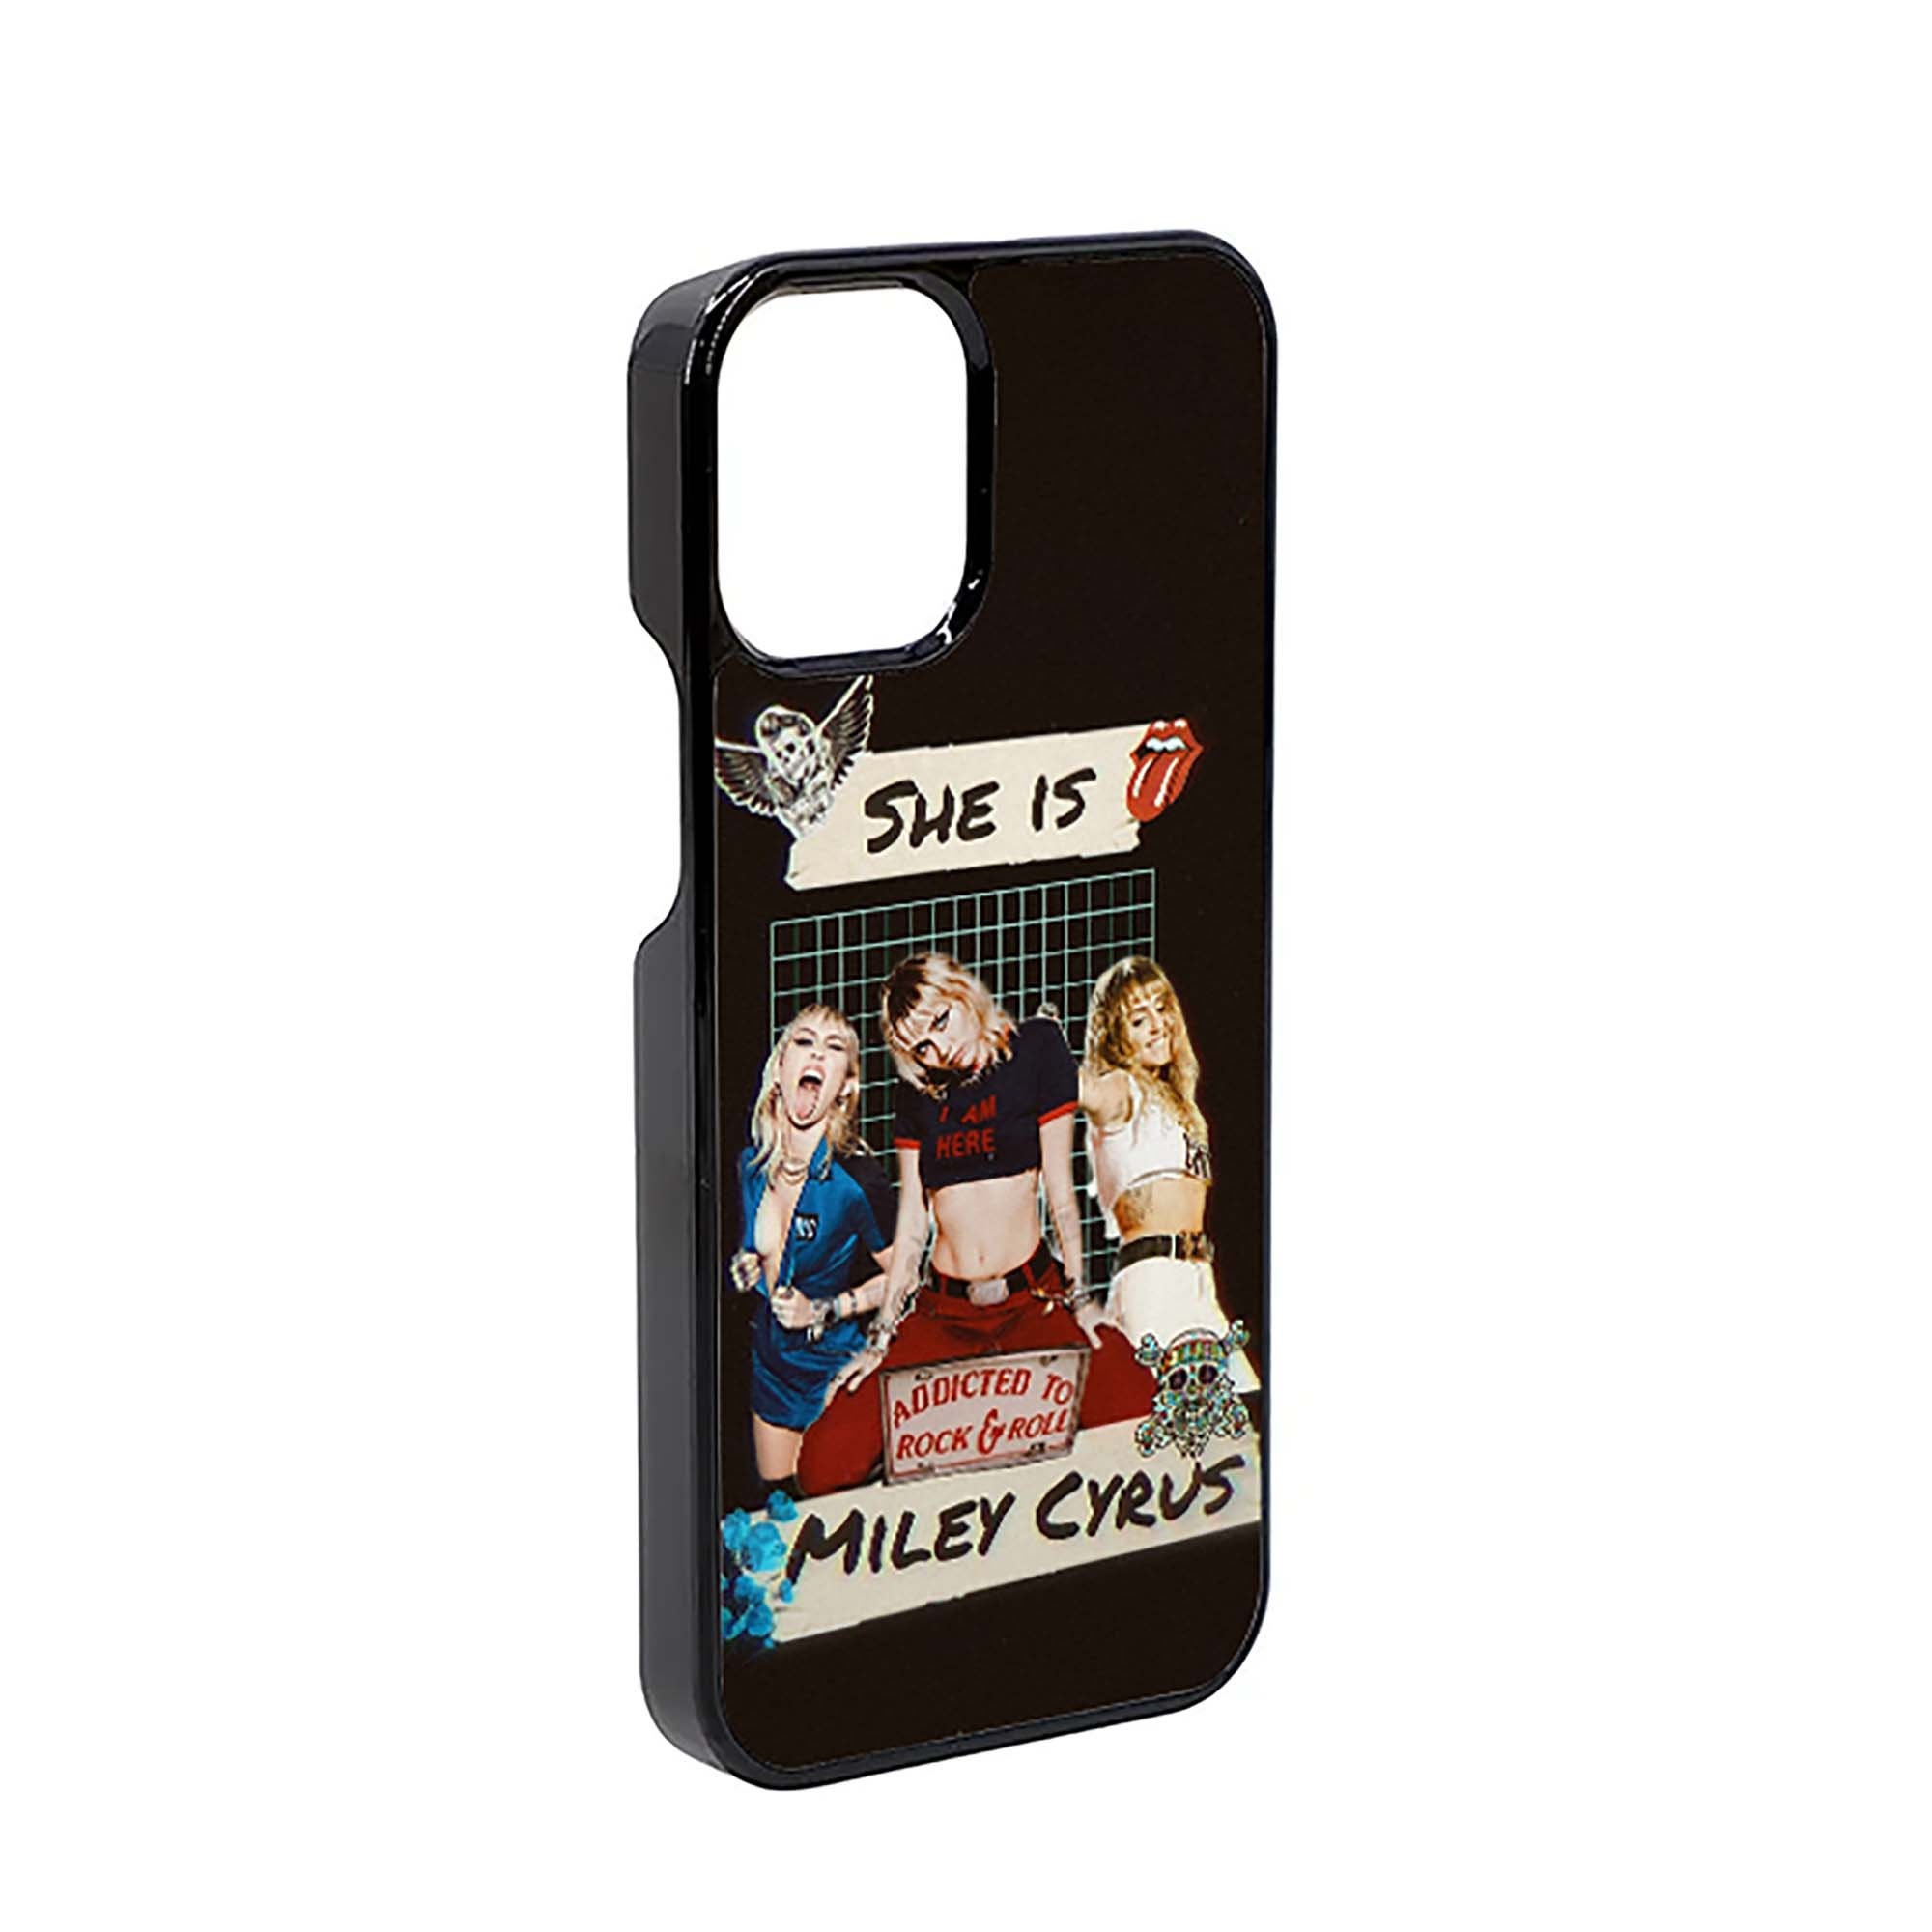 Miley Cyrus 23 Replica Outfit · 2n2 · Online Store Powered by Storenvy